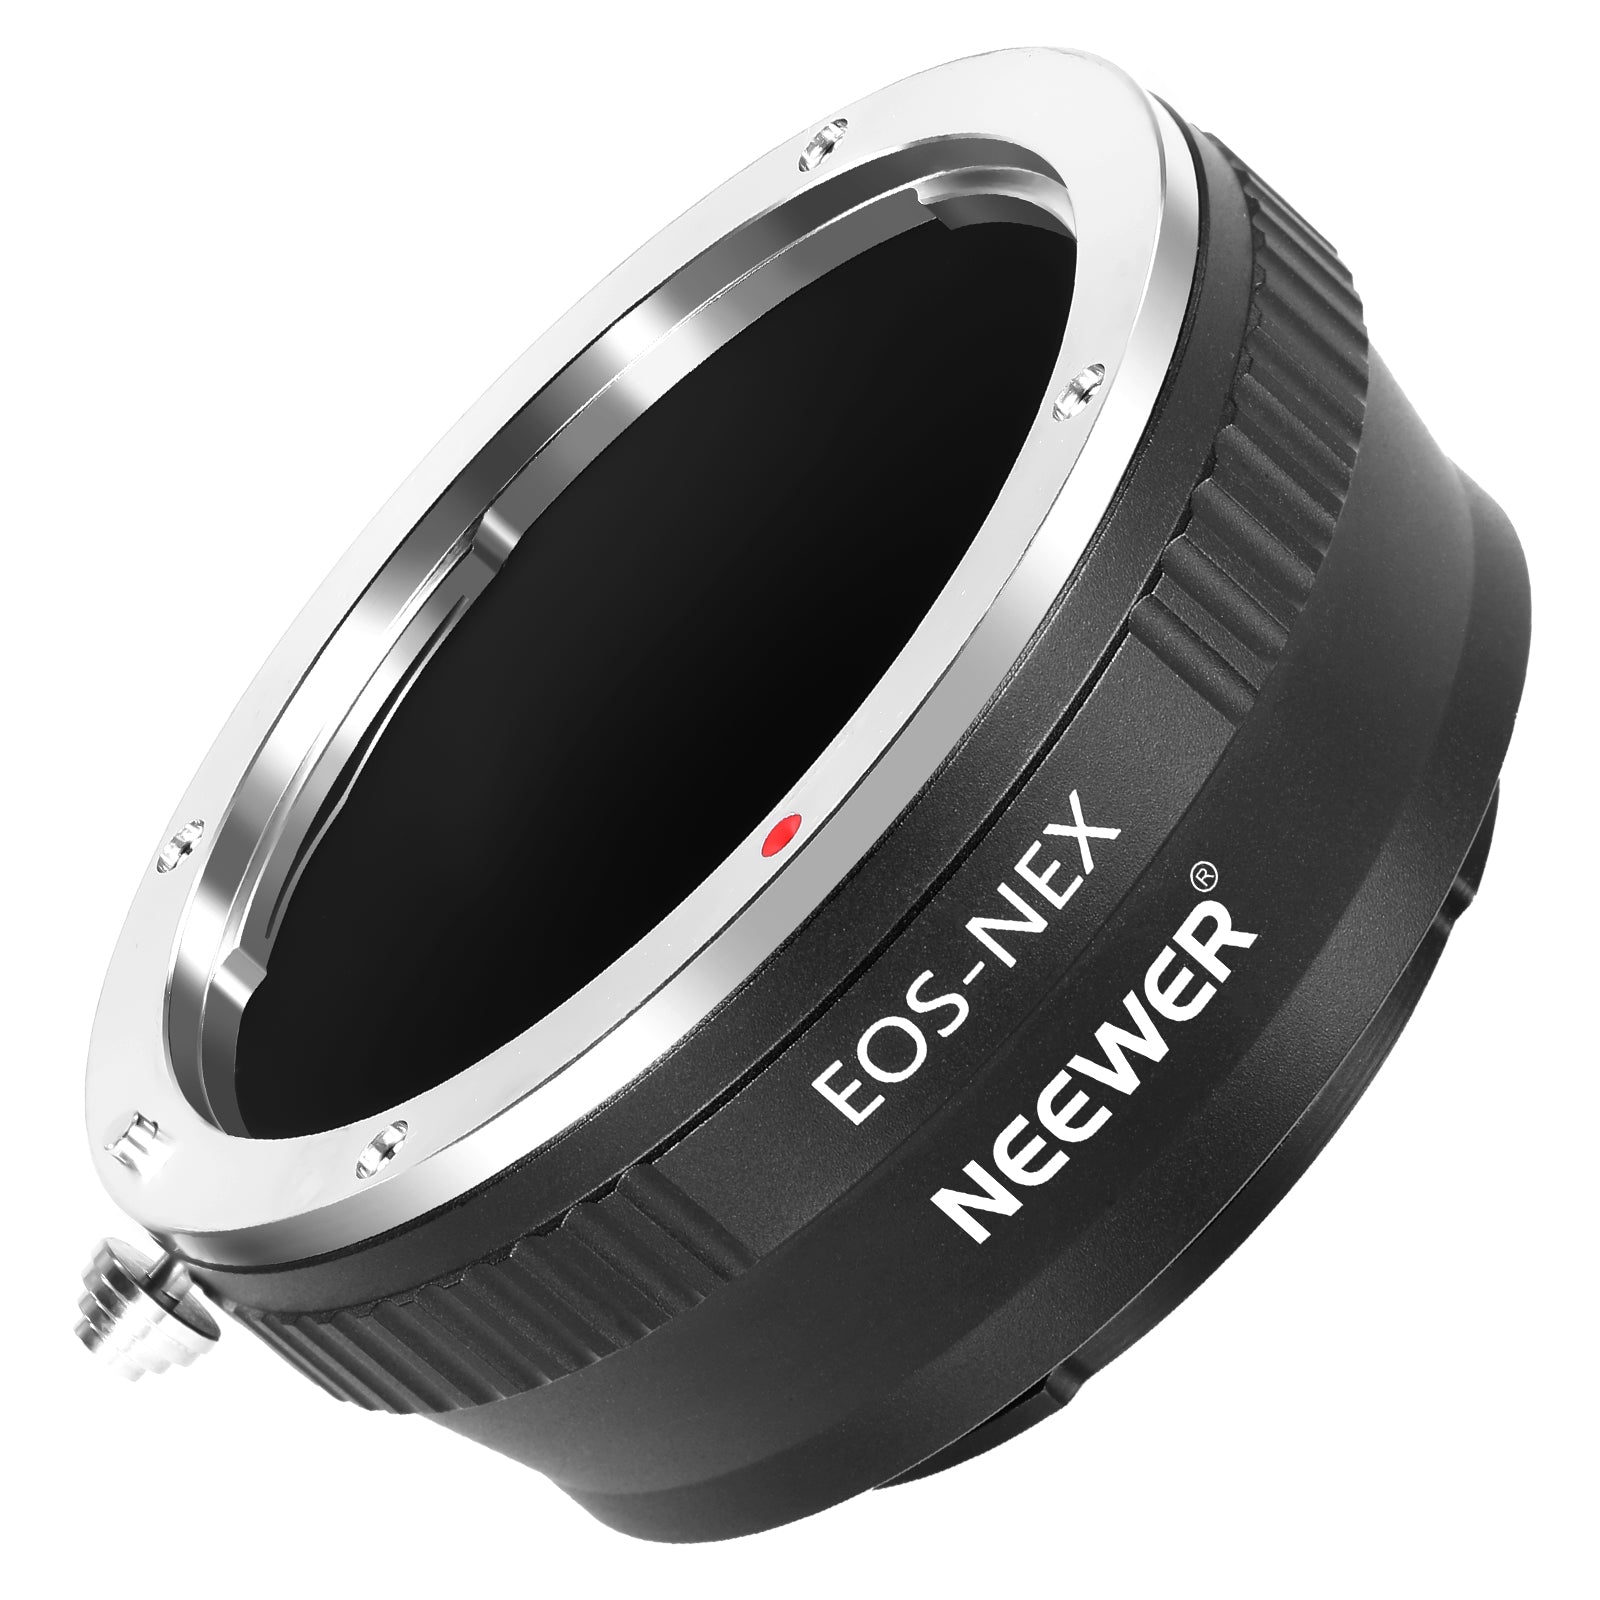 NEEWER Canon EF/EF-S Lens to Sony E Camera Mount Adapter - NEEWER